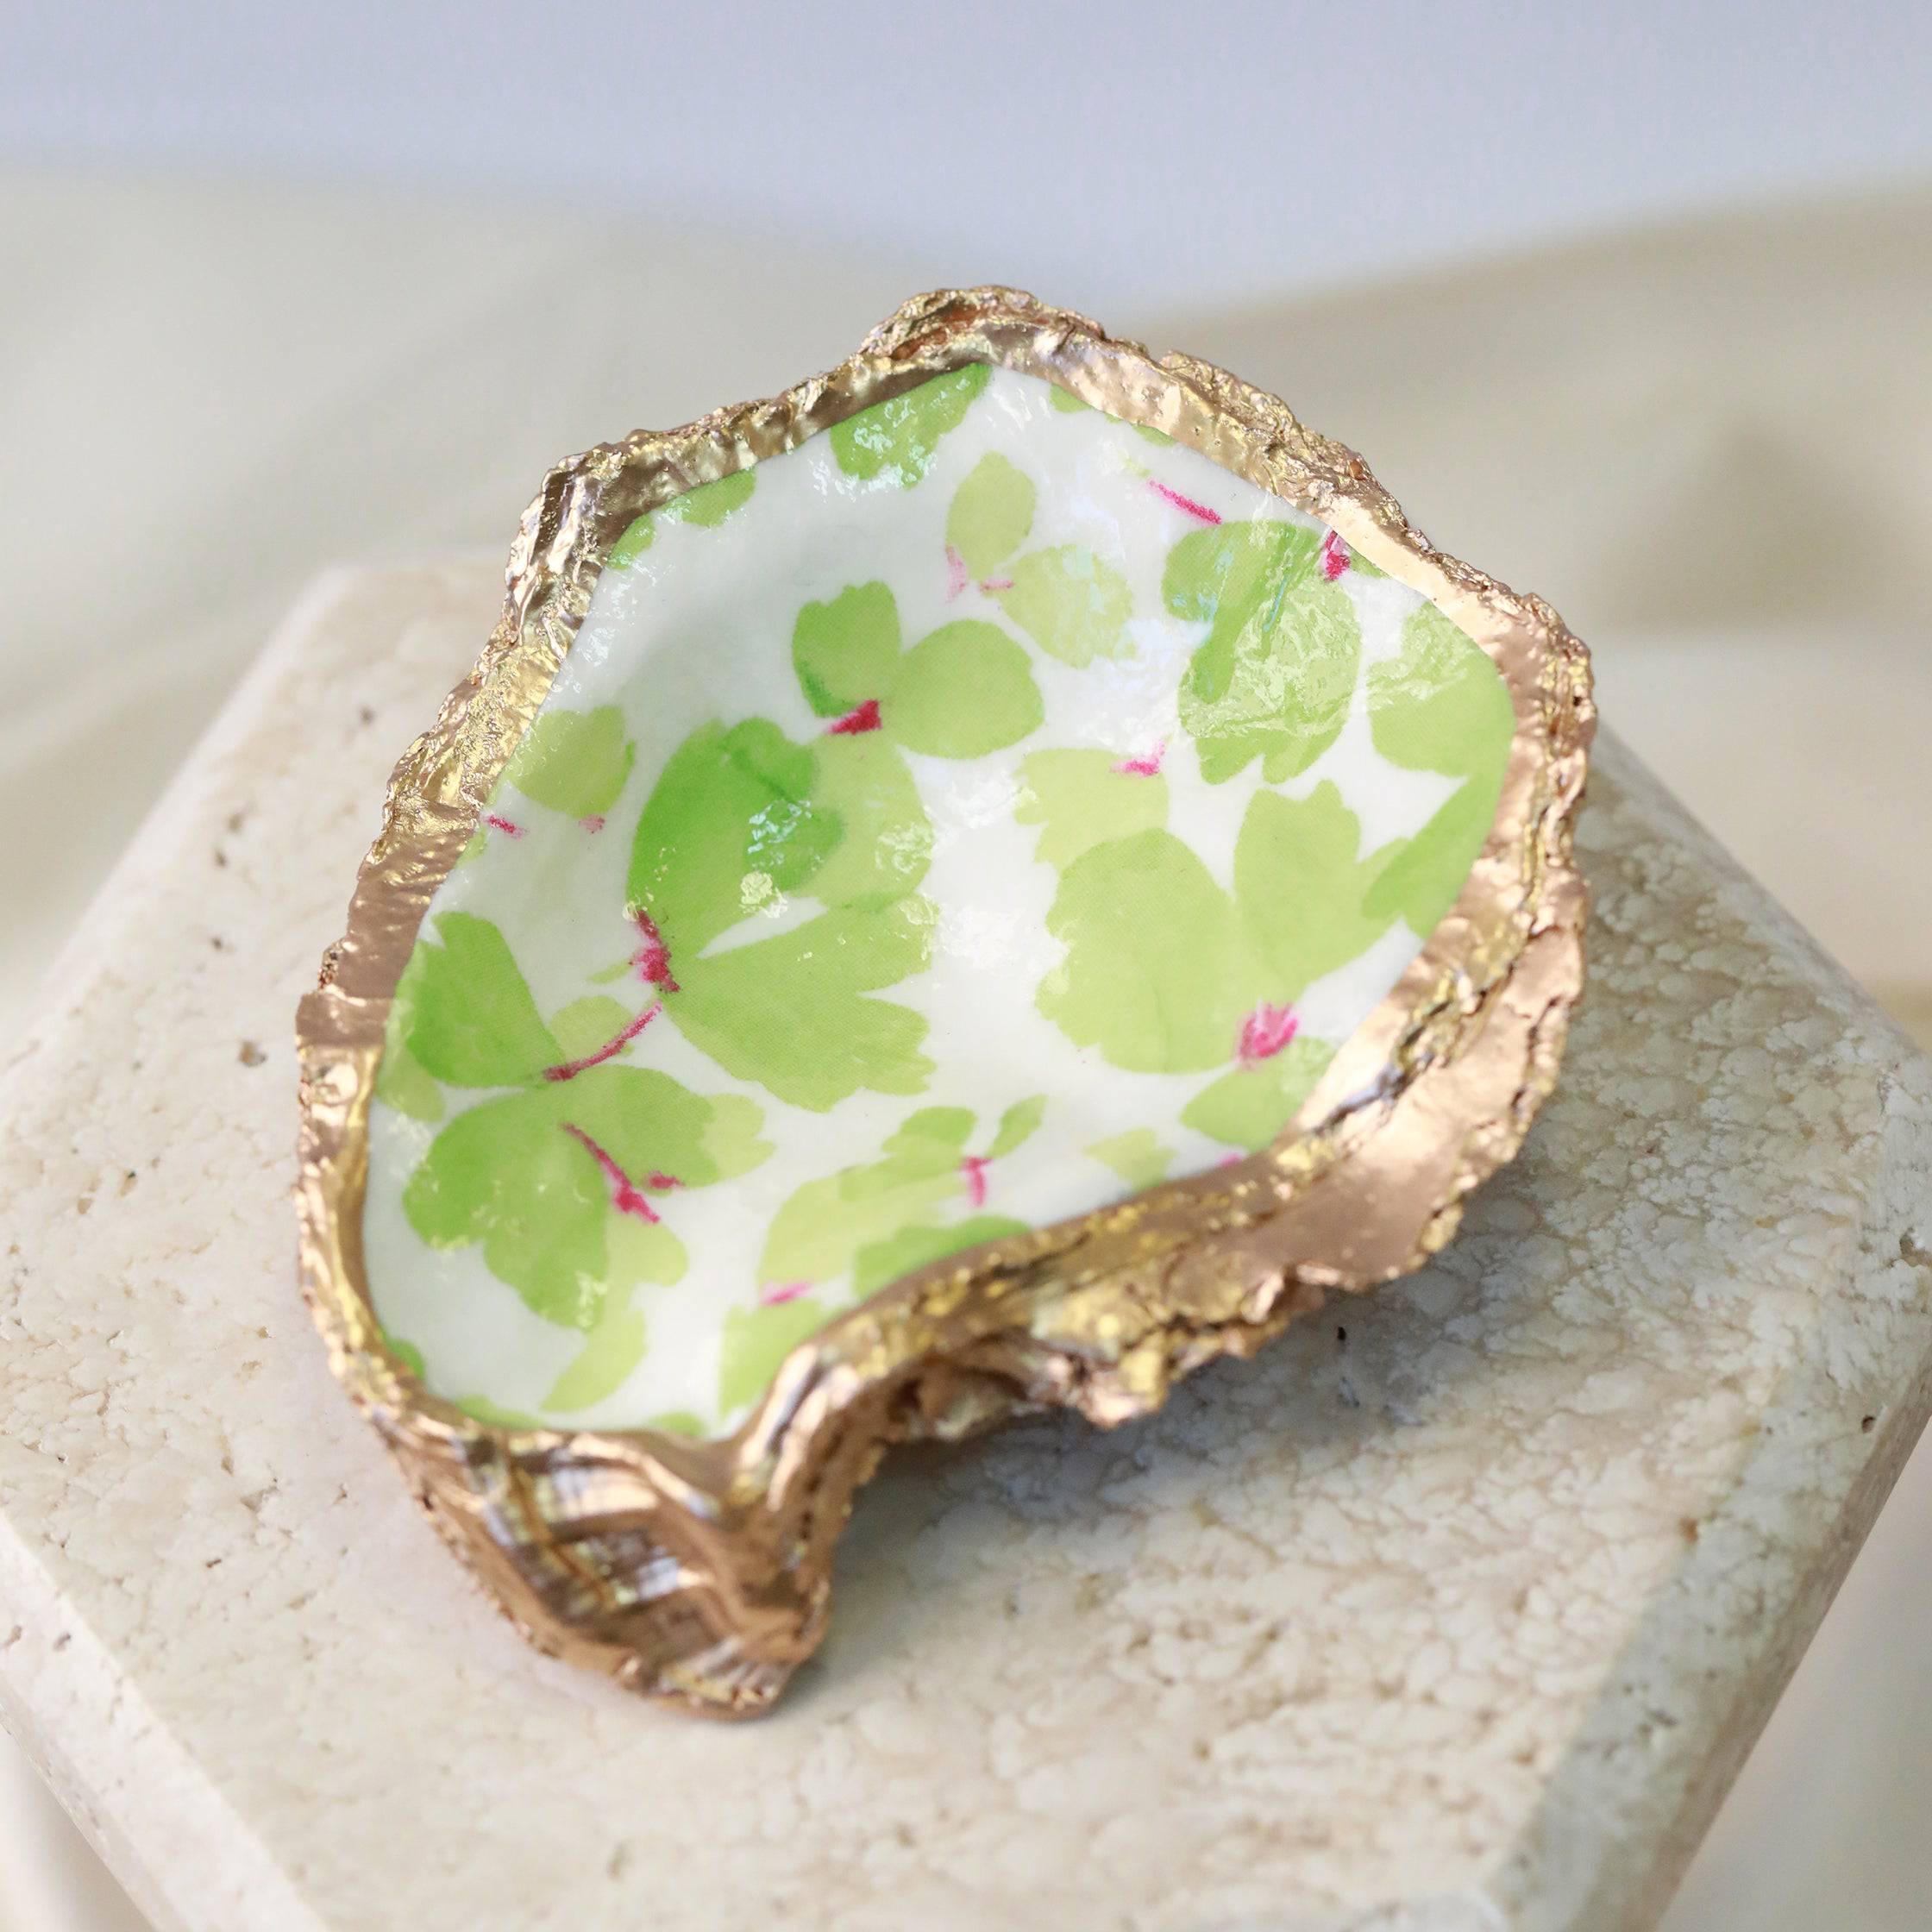 Field of Clover Oyster Dish - The Gilded Witch